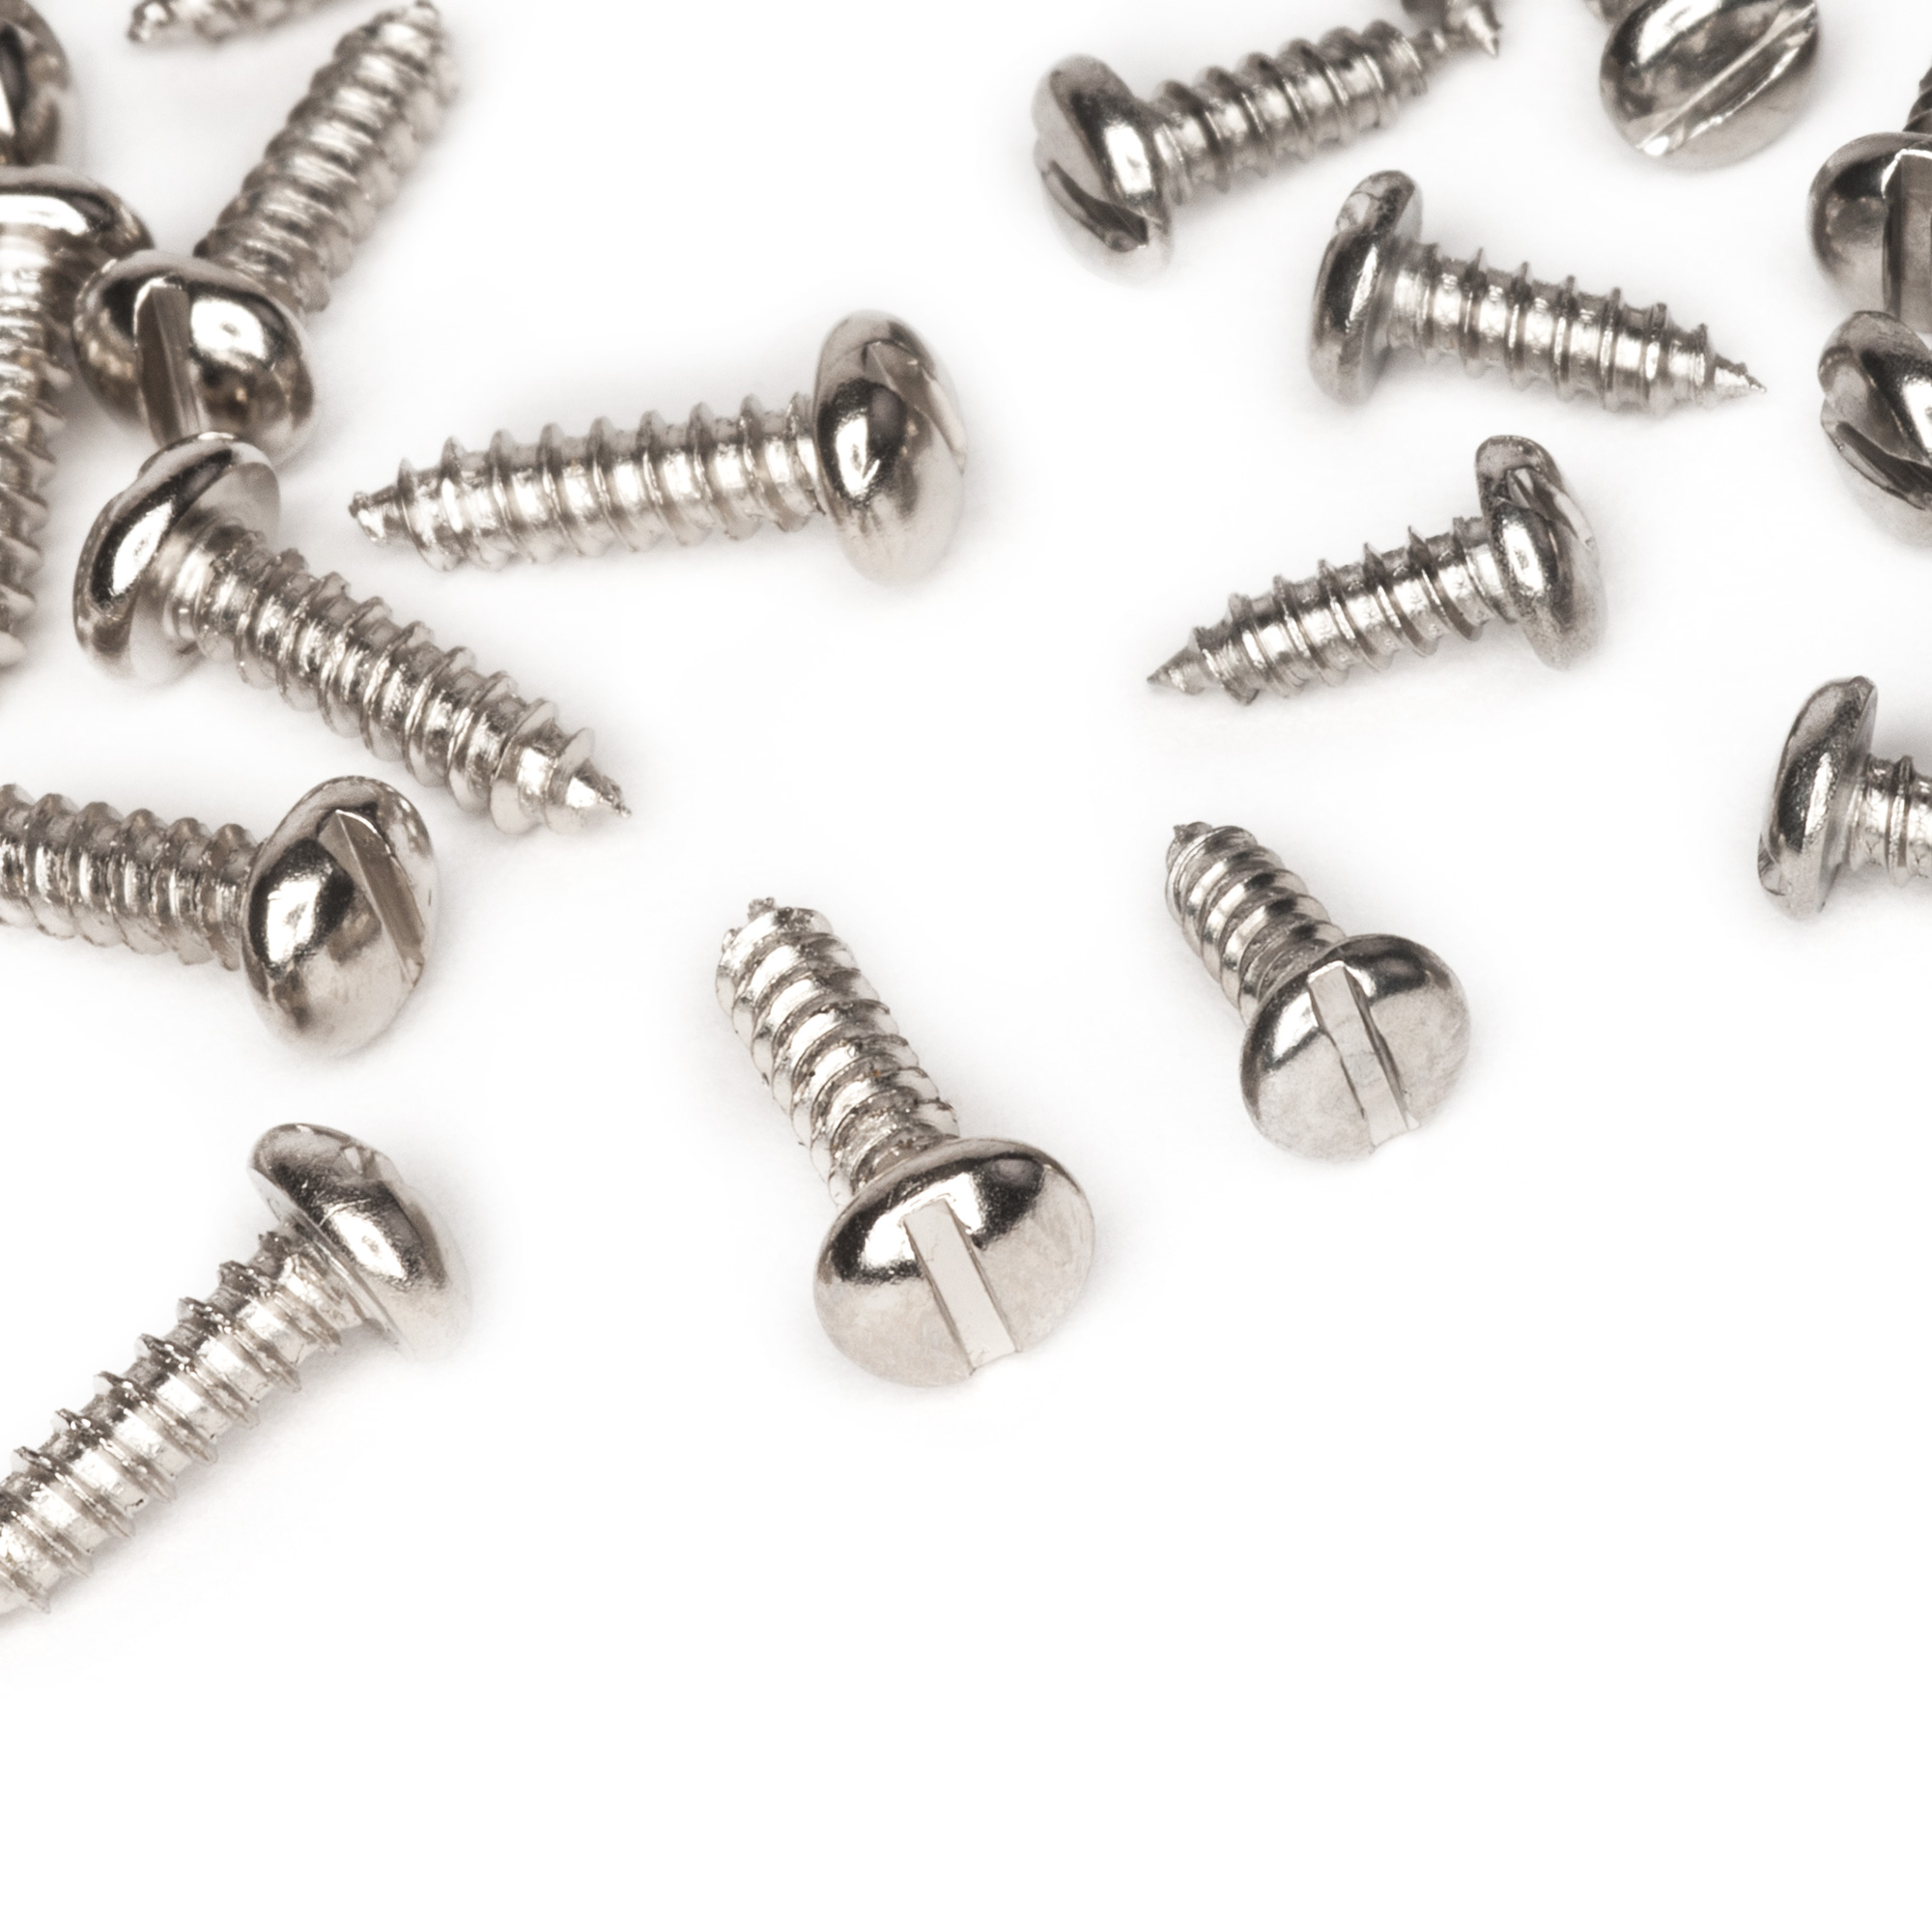 Screws for Coverplates